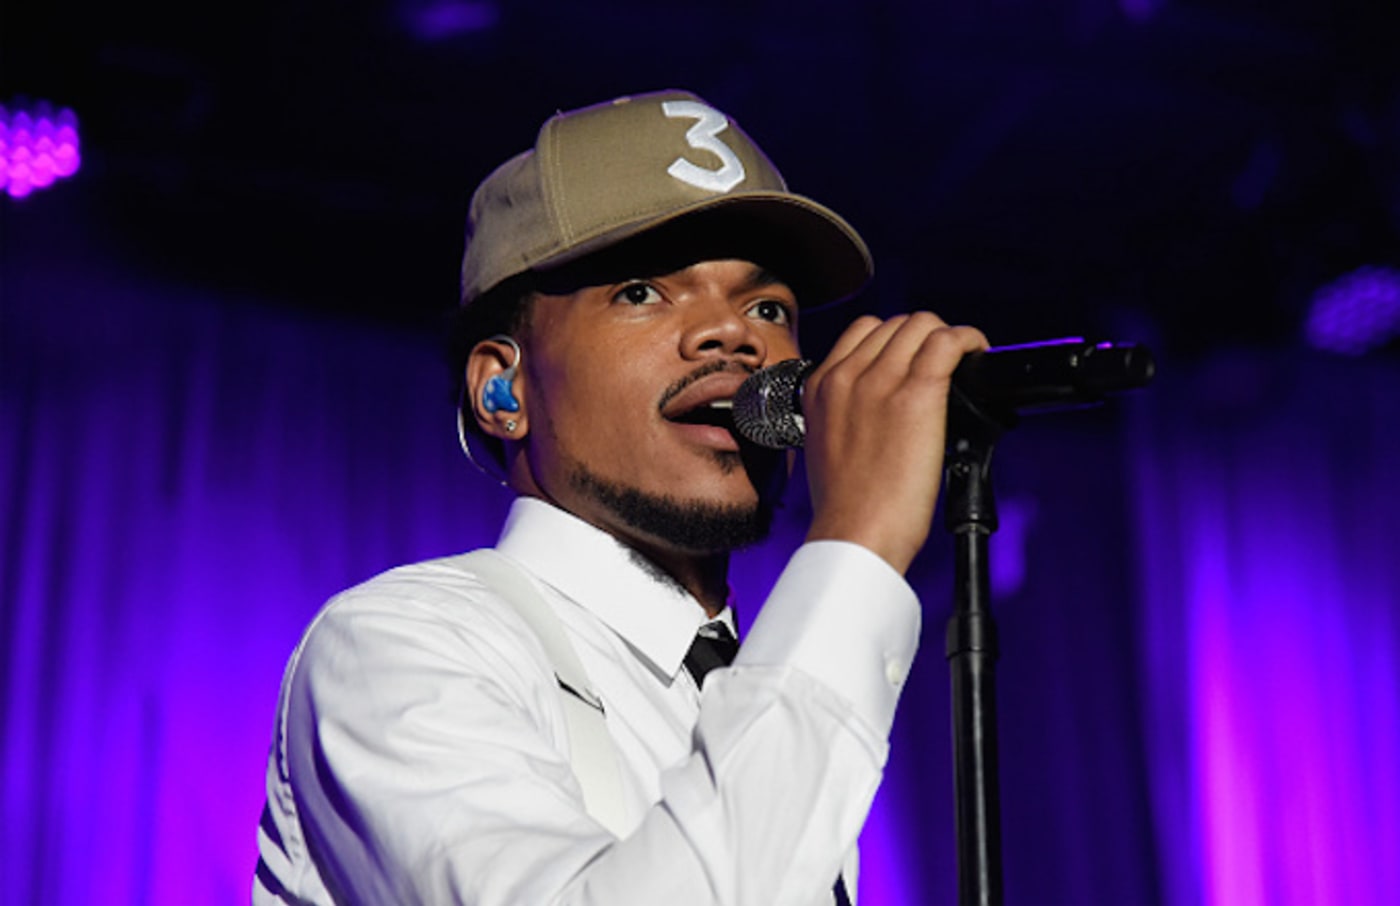 Chance The Rapper performs onstage at Pre GRAMMY Gala and Salute